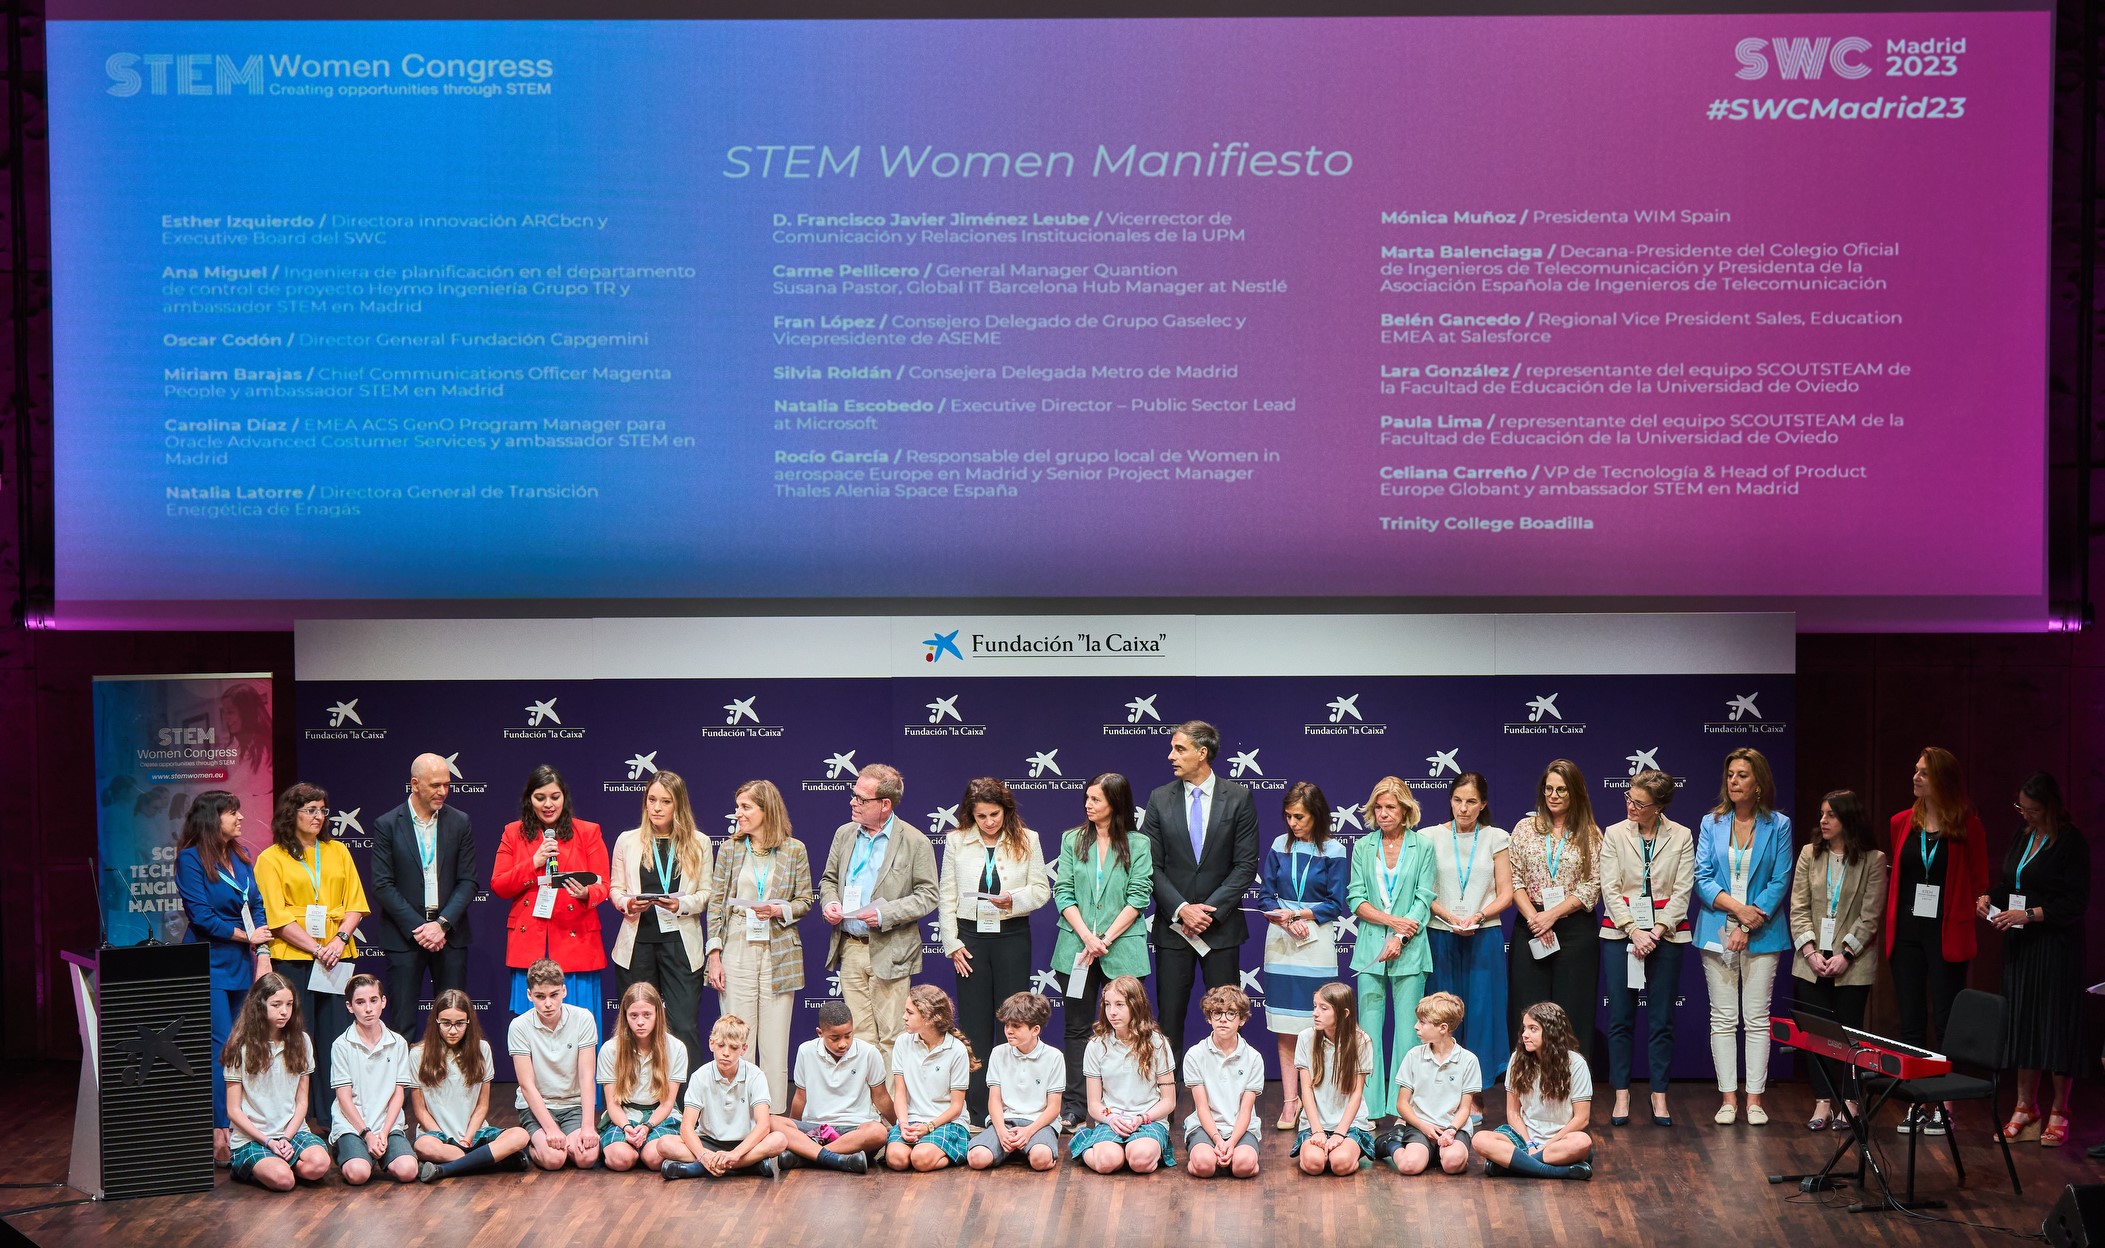 Professionals during the STEM Women Congress 